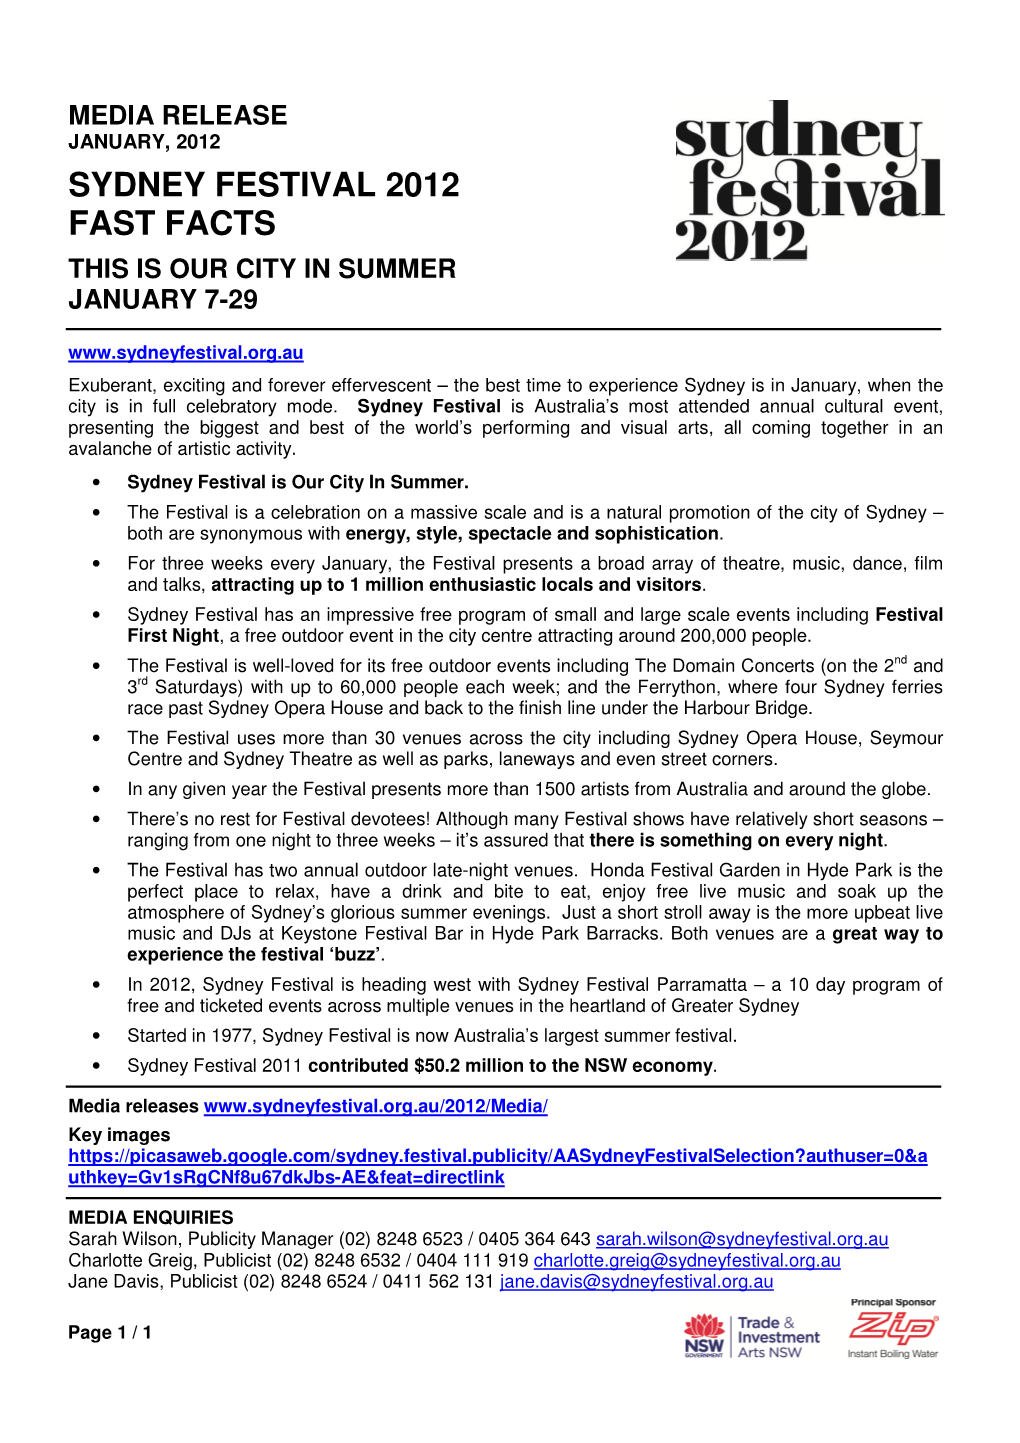 Sydney Festival 2012 Fast Facts